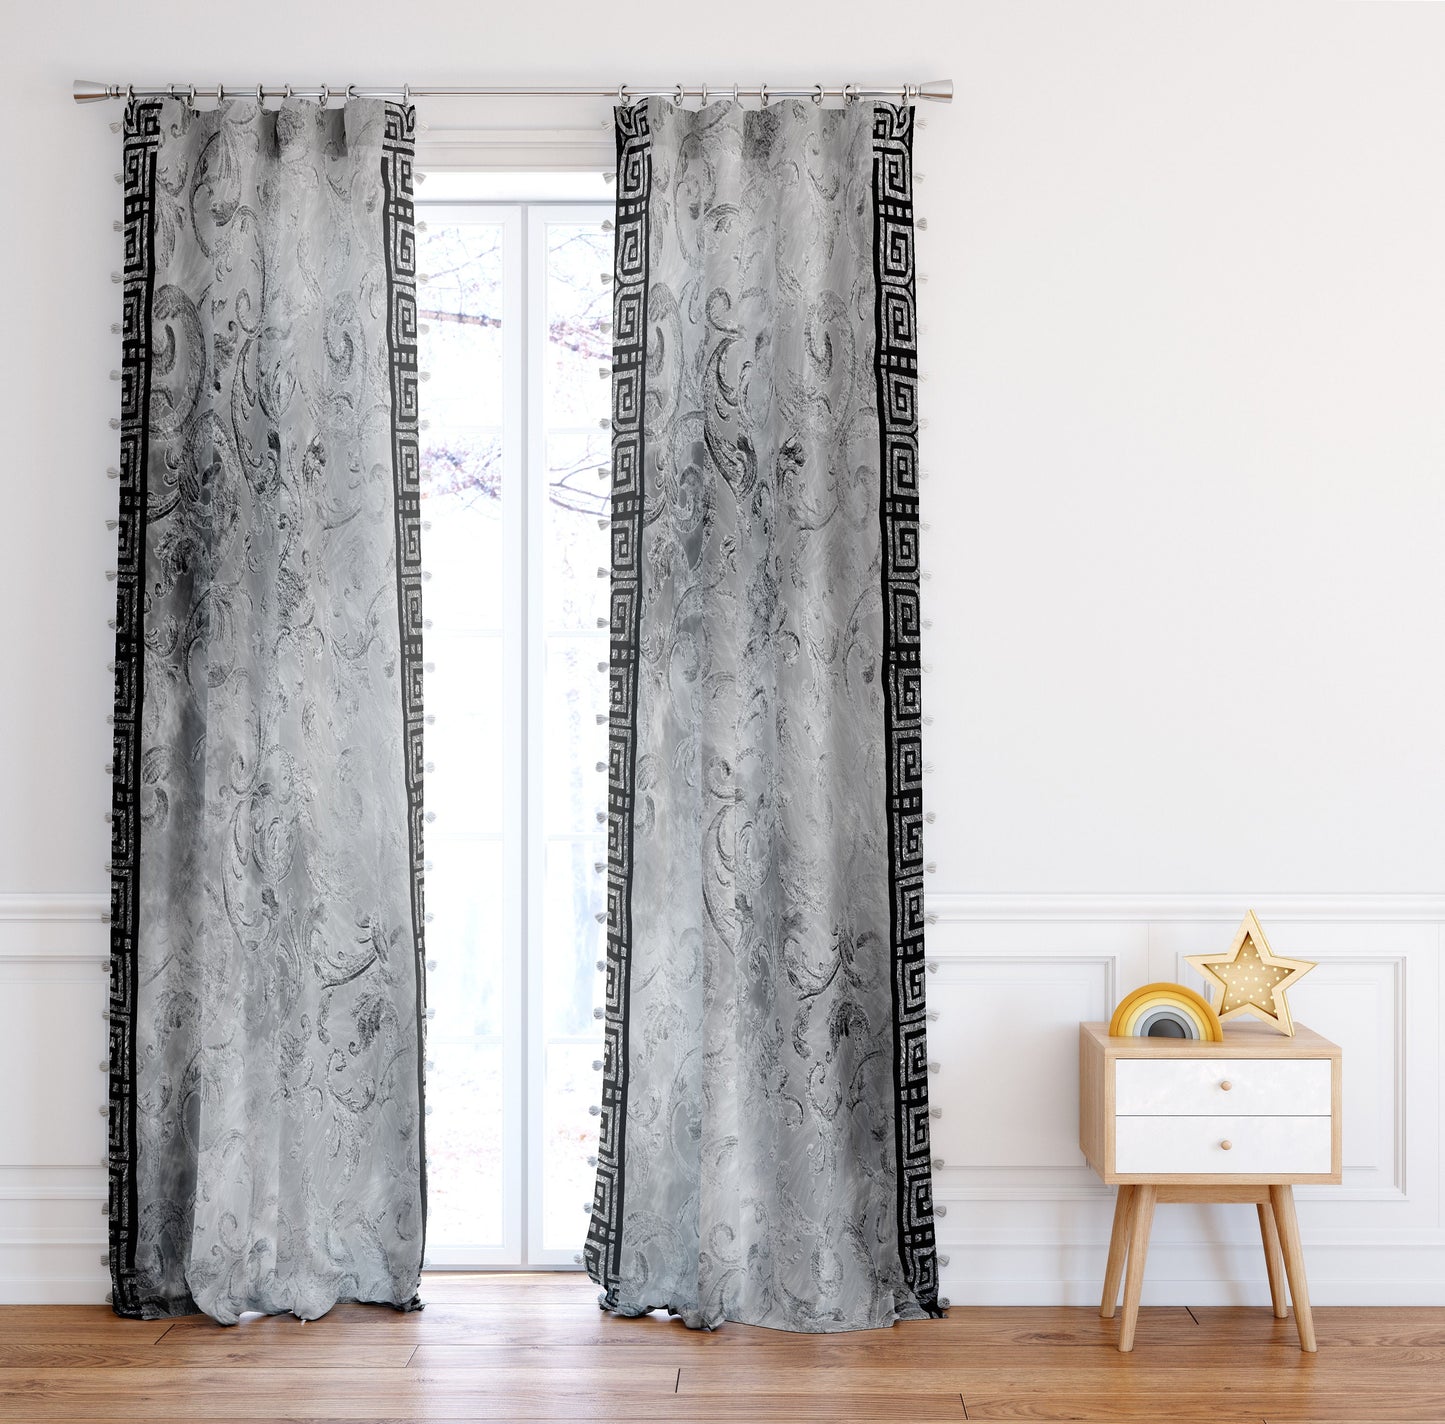 Curtains 2 PCS SET gey-silver baroque or greek style romantic design • room curtains  • home decor